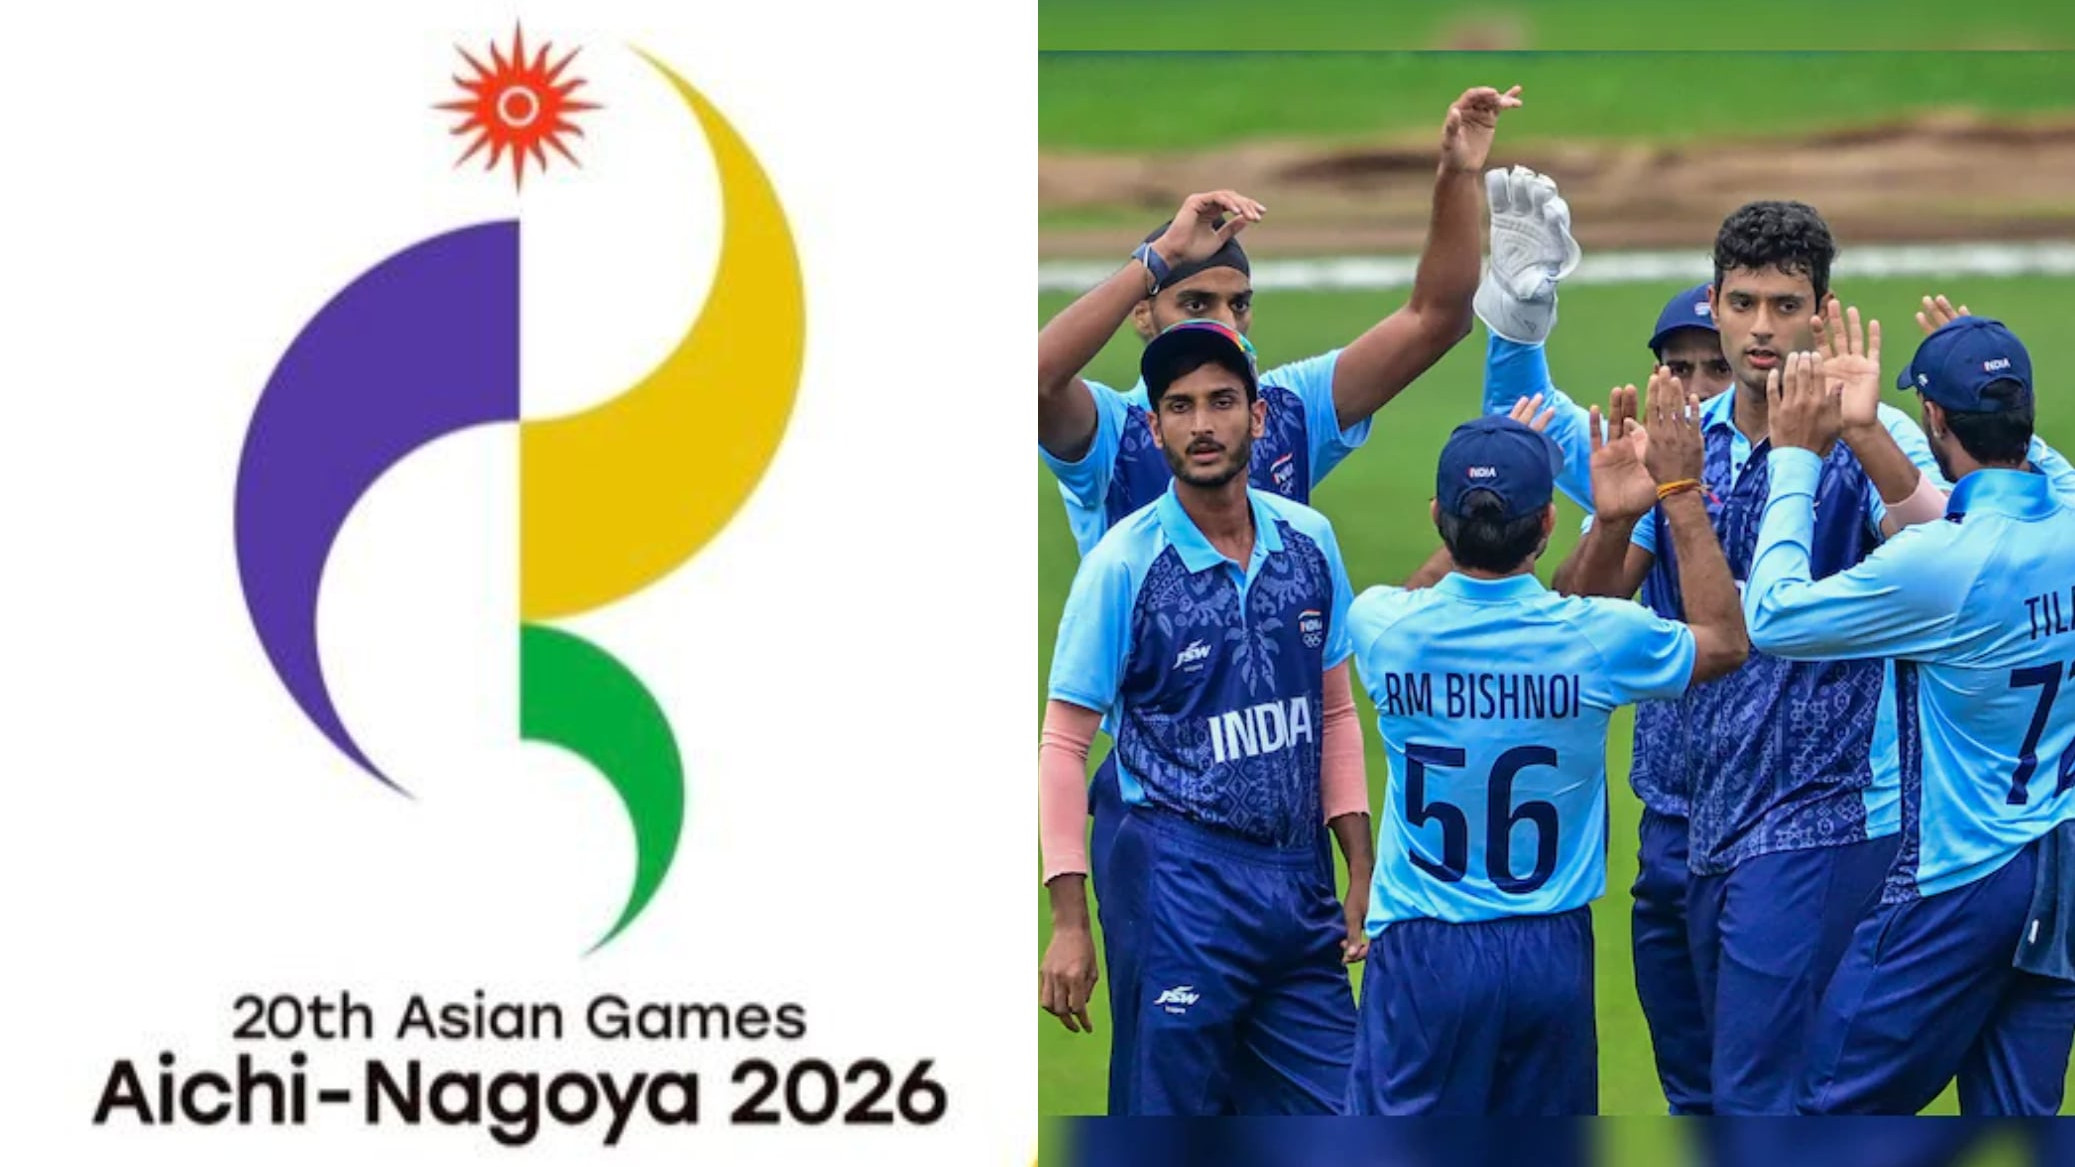 Olympic Council of Asia keen to have cricket in 2026 Asian Games in Japan despite venue issues